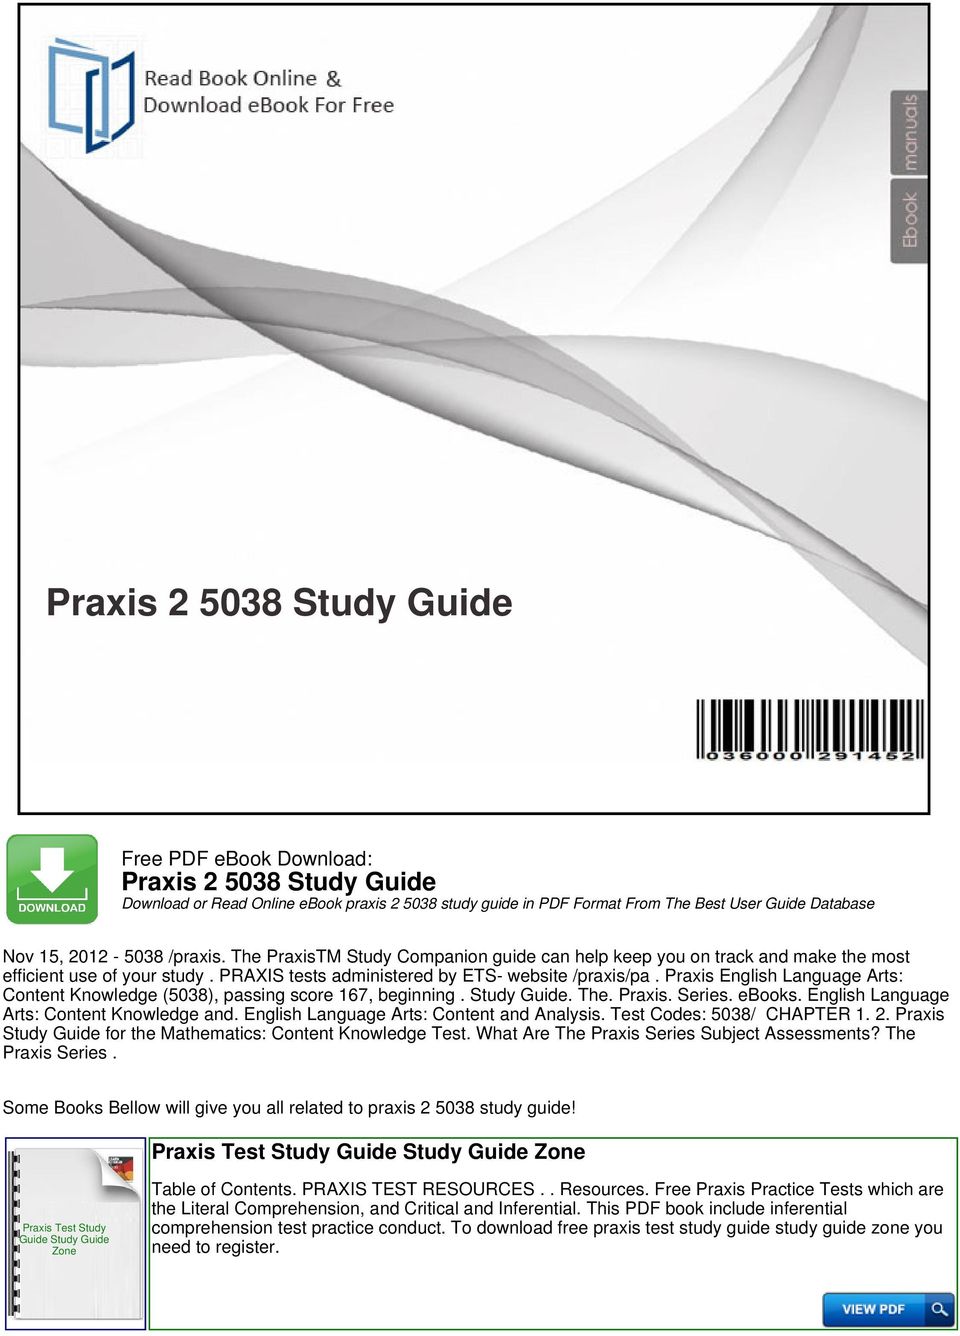 Praxis English Language Arts: Content Knowledge (5038), passing score 167, beginning. Study Guide. The. Praxis. Series. ebooks. English Language Arts: Content Knowledge and.